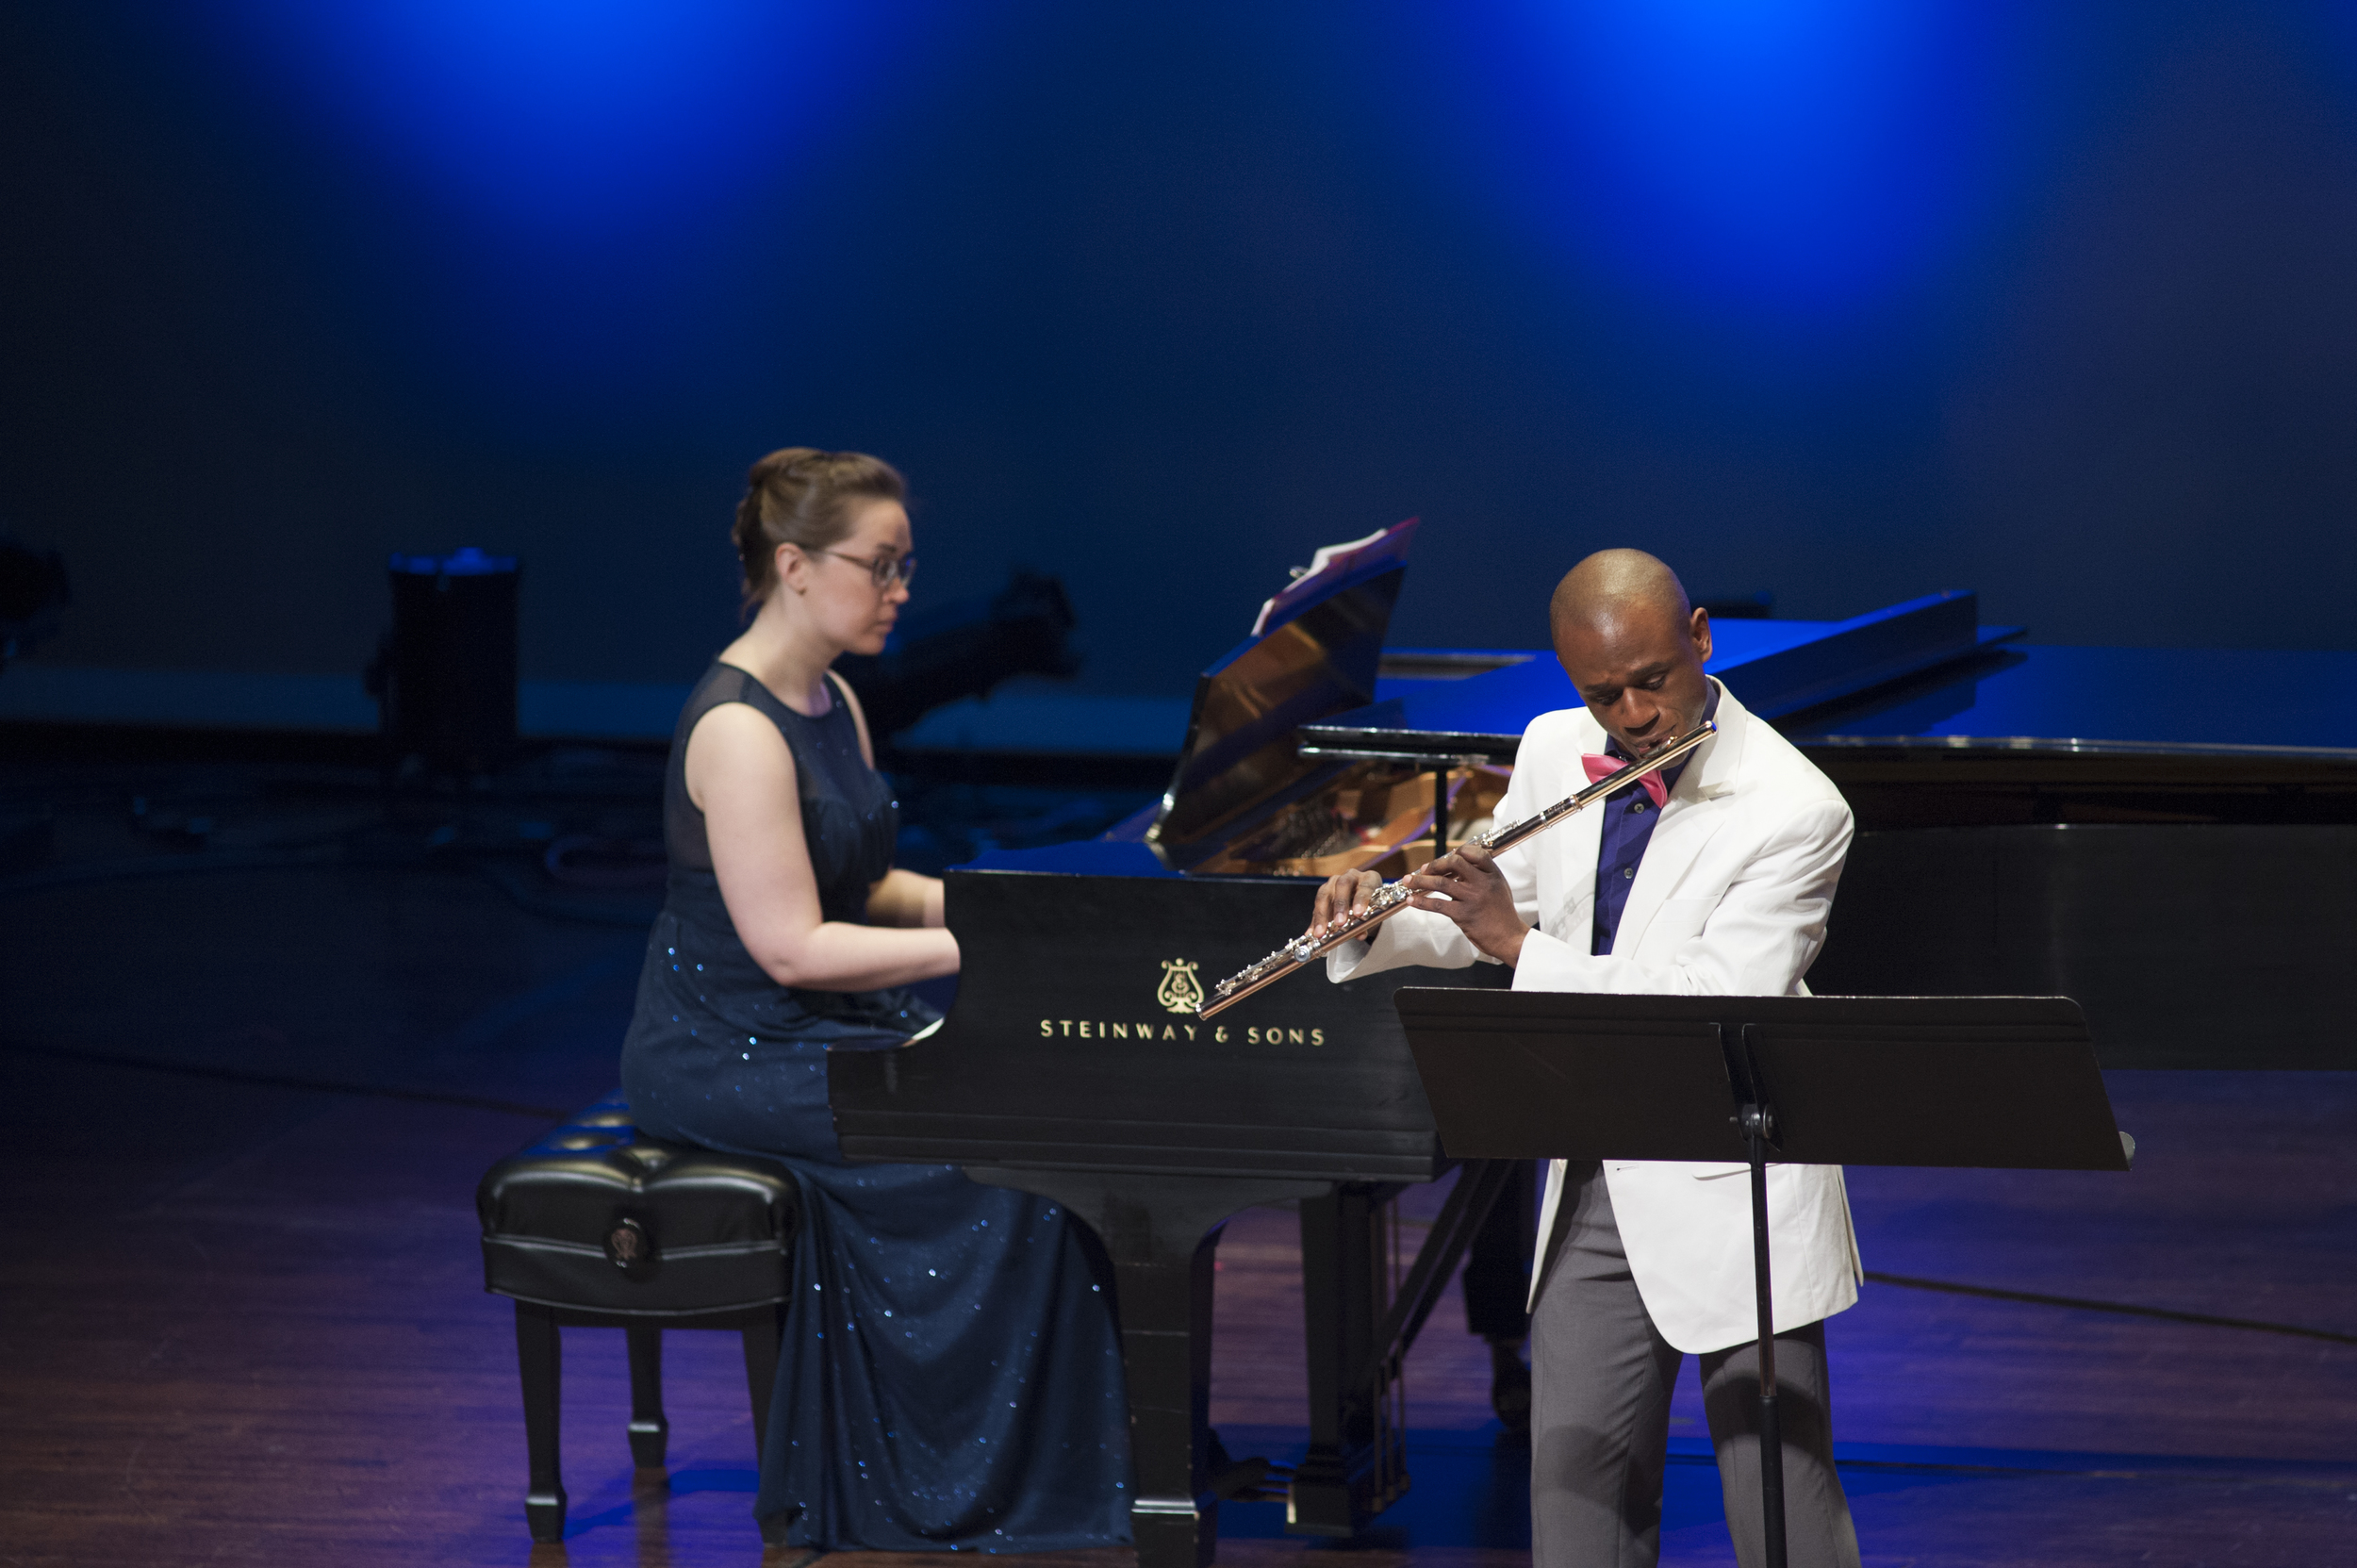 Performance at the Kennedy Center